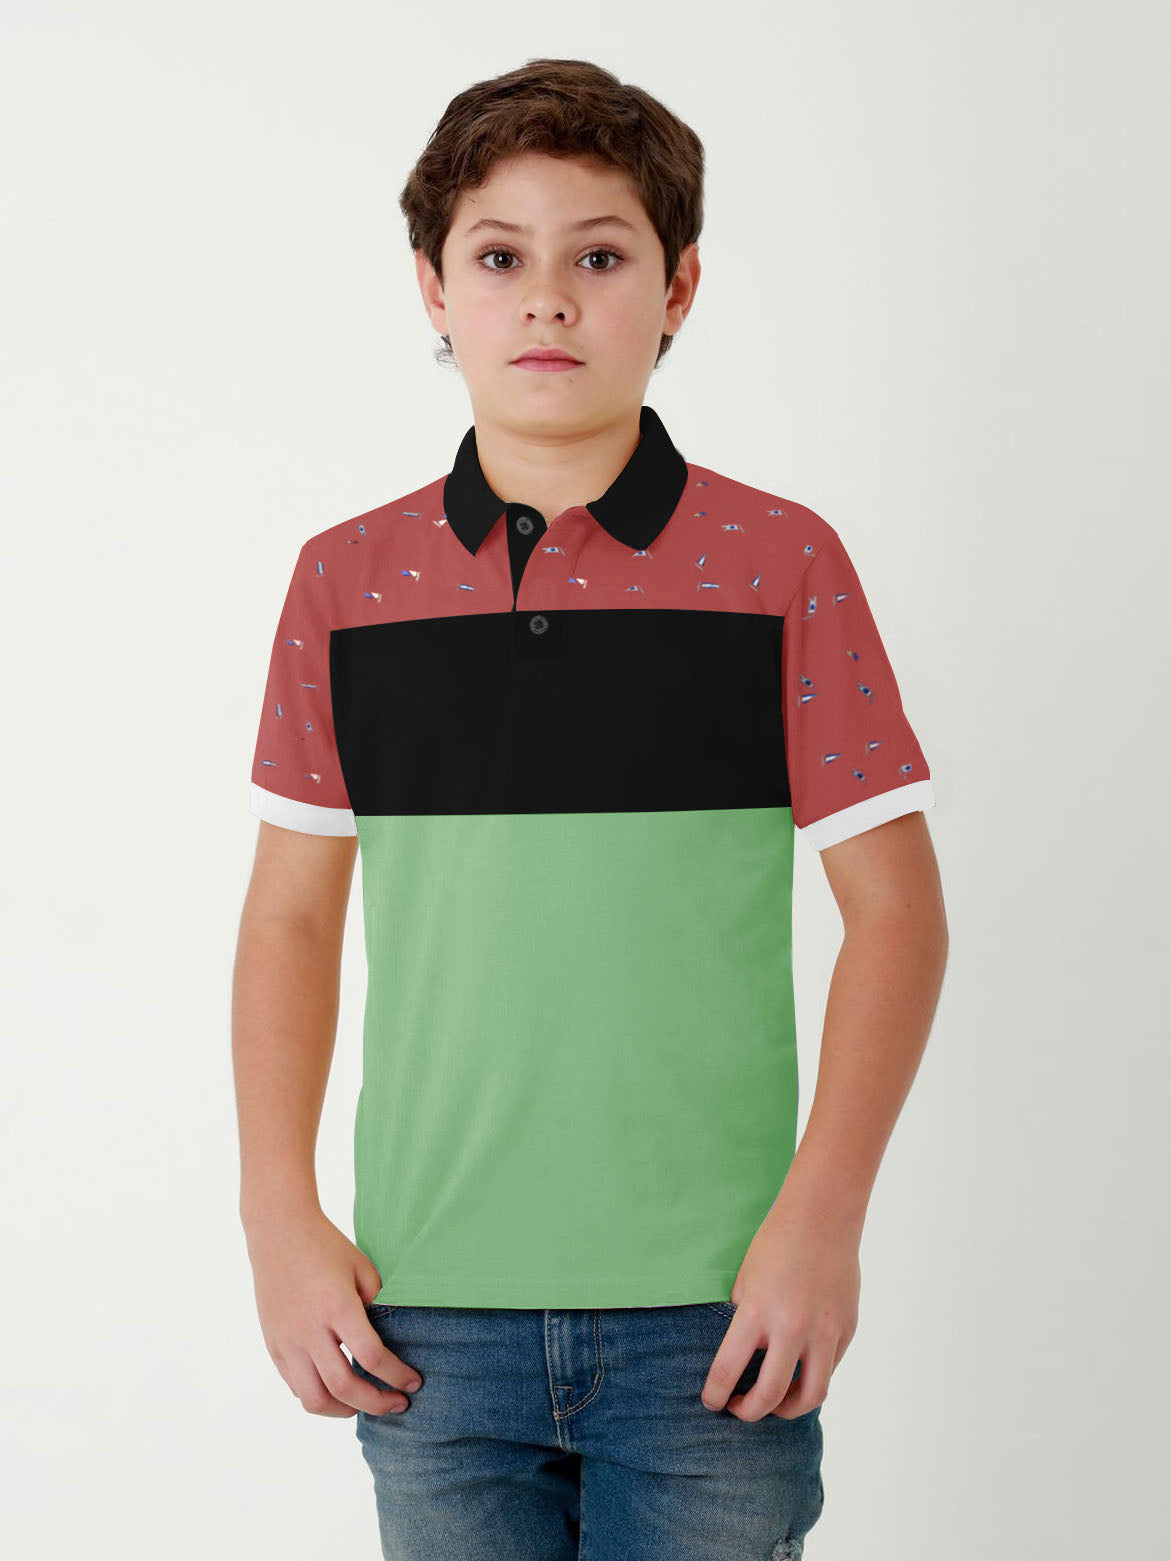 NXT Half Sleeve P.Q Polo Shirt For Kids-Pink with Black & Maroon-SP1683